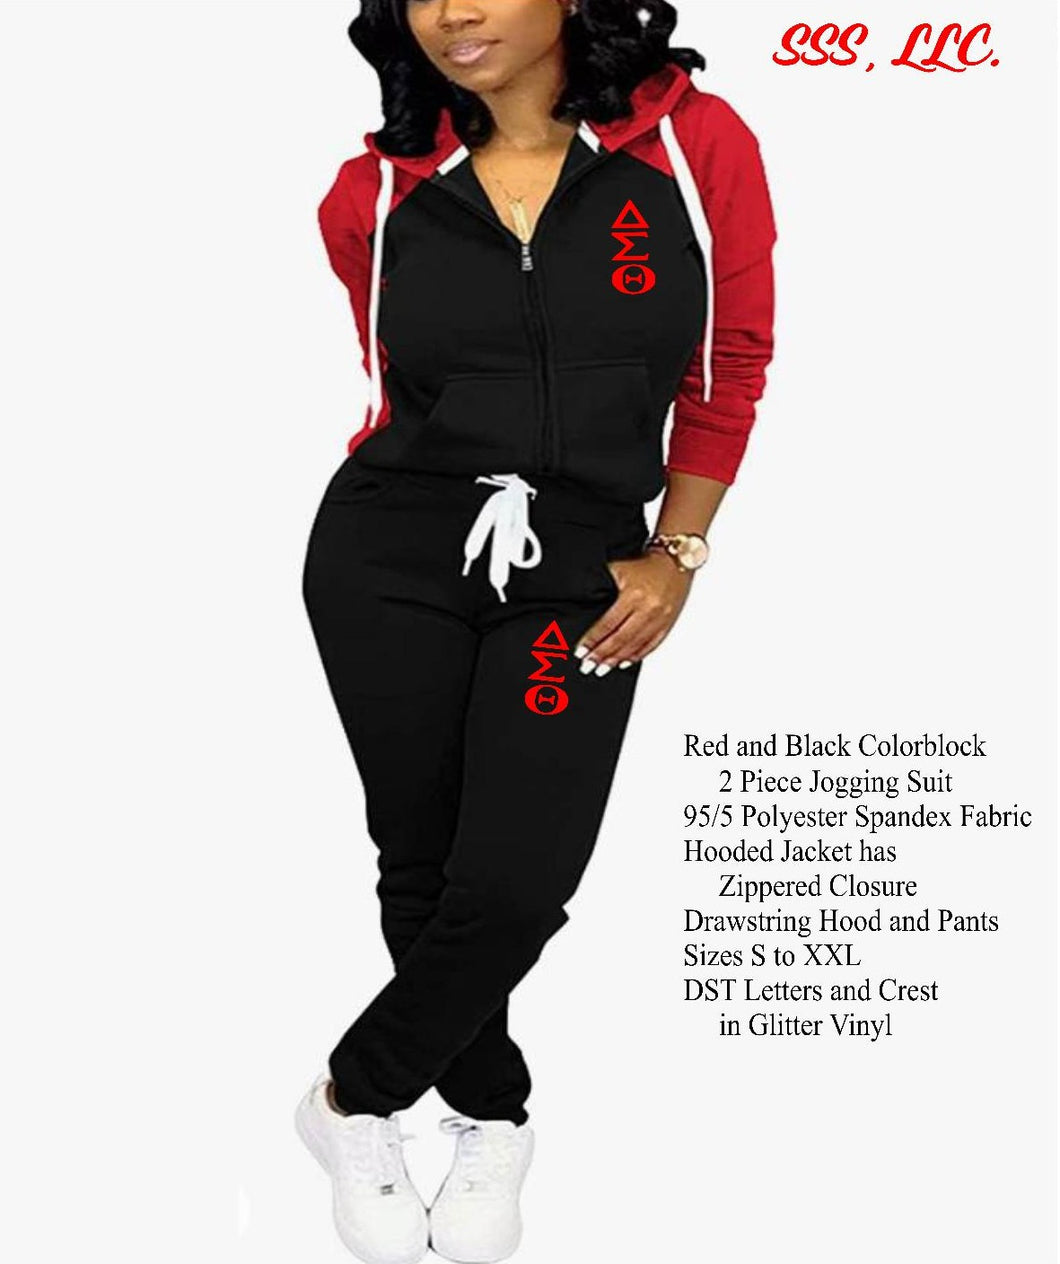 Red and Black DST  Hooded Colorblock Jogging Suit